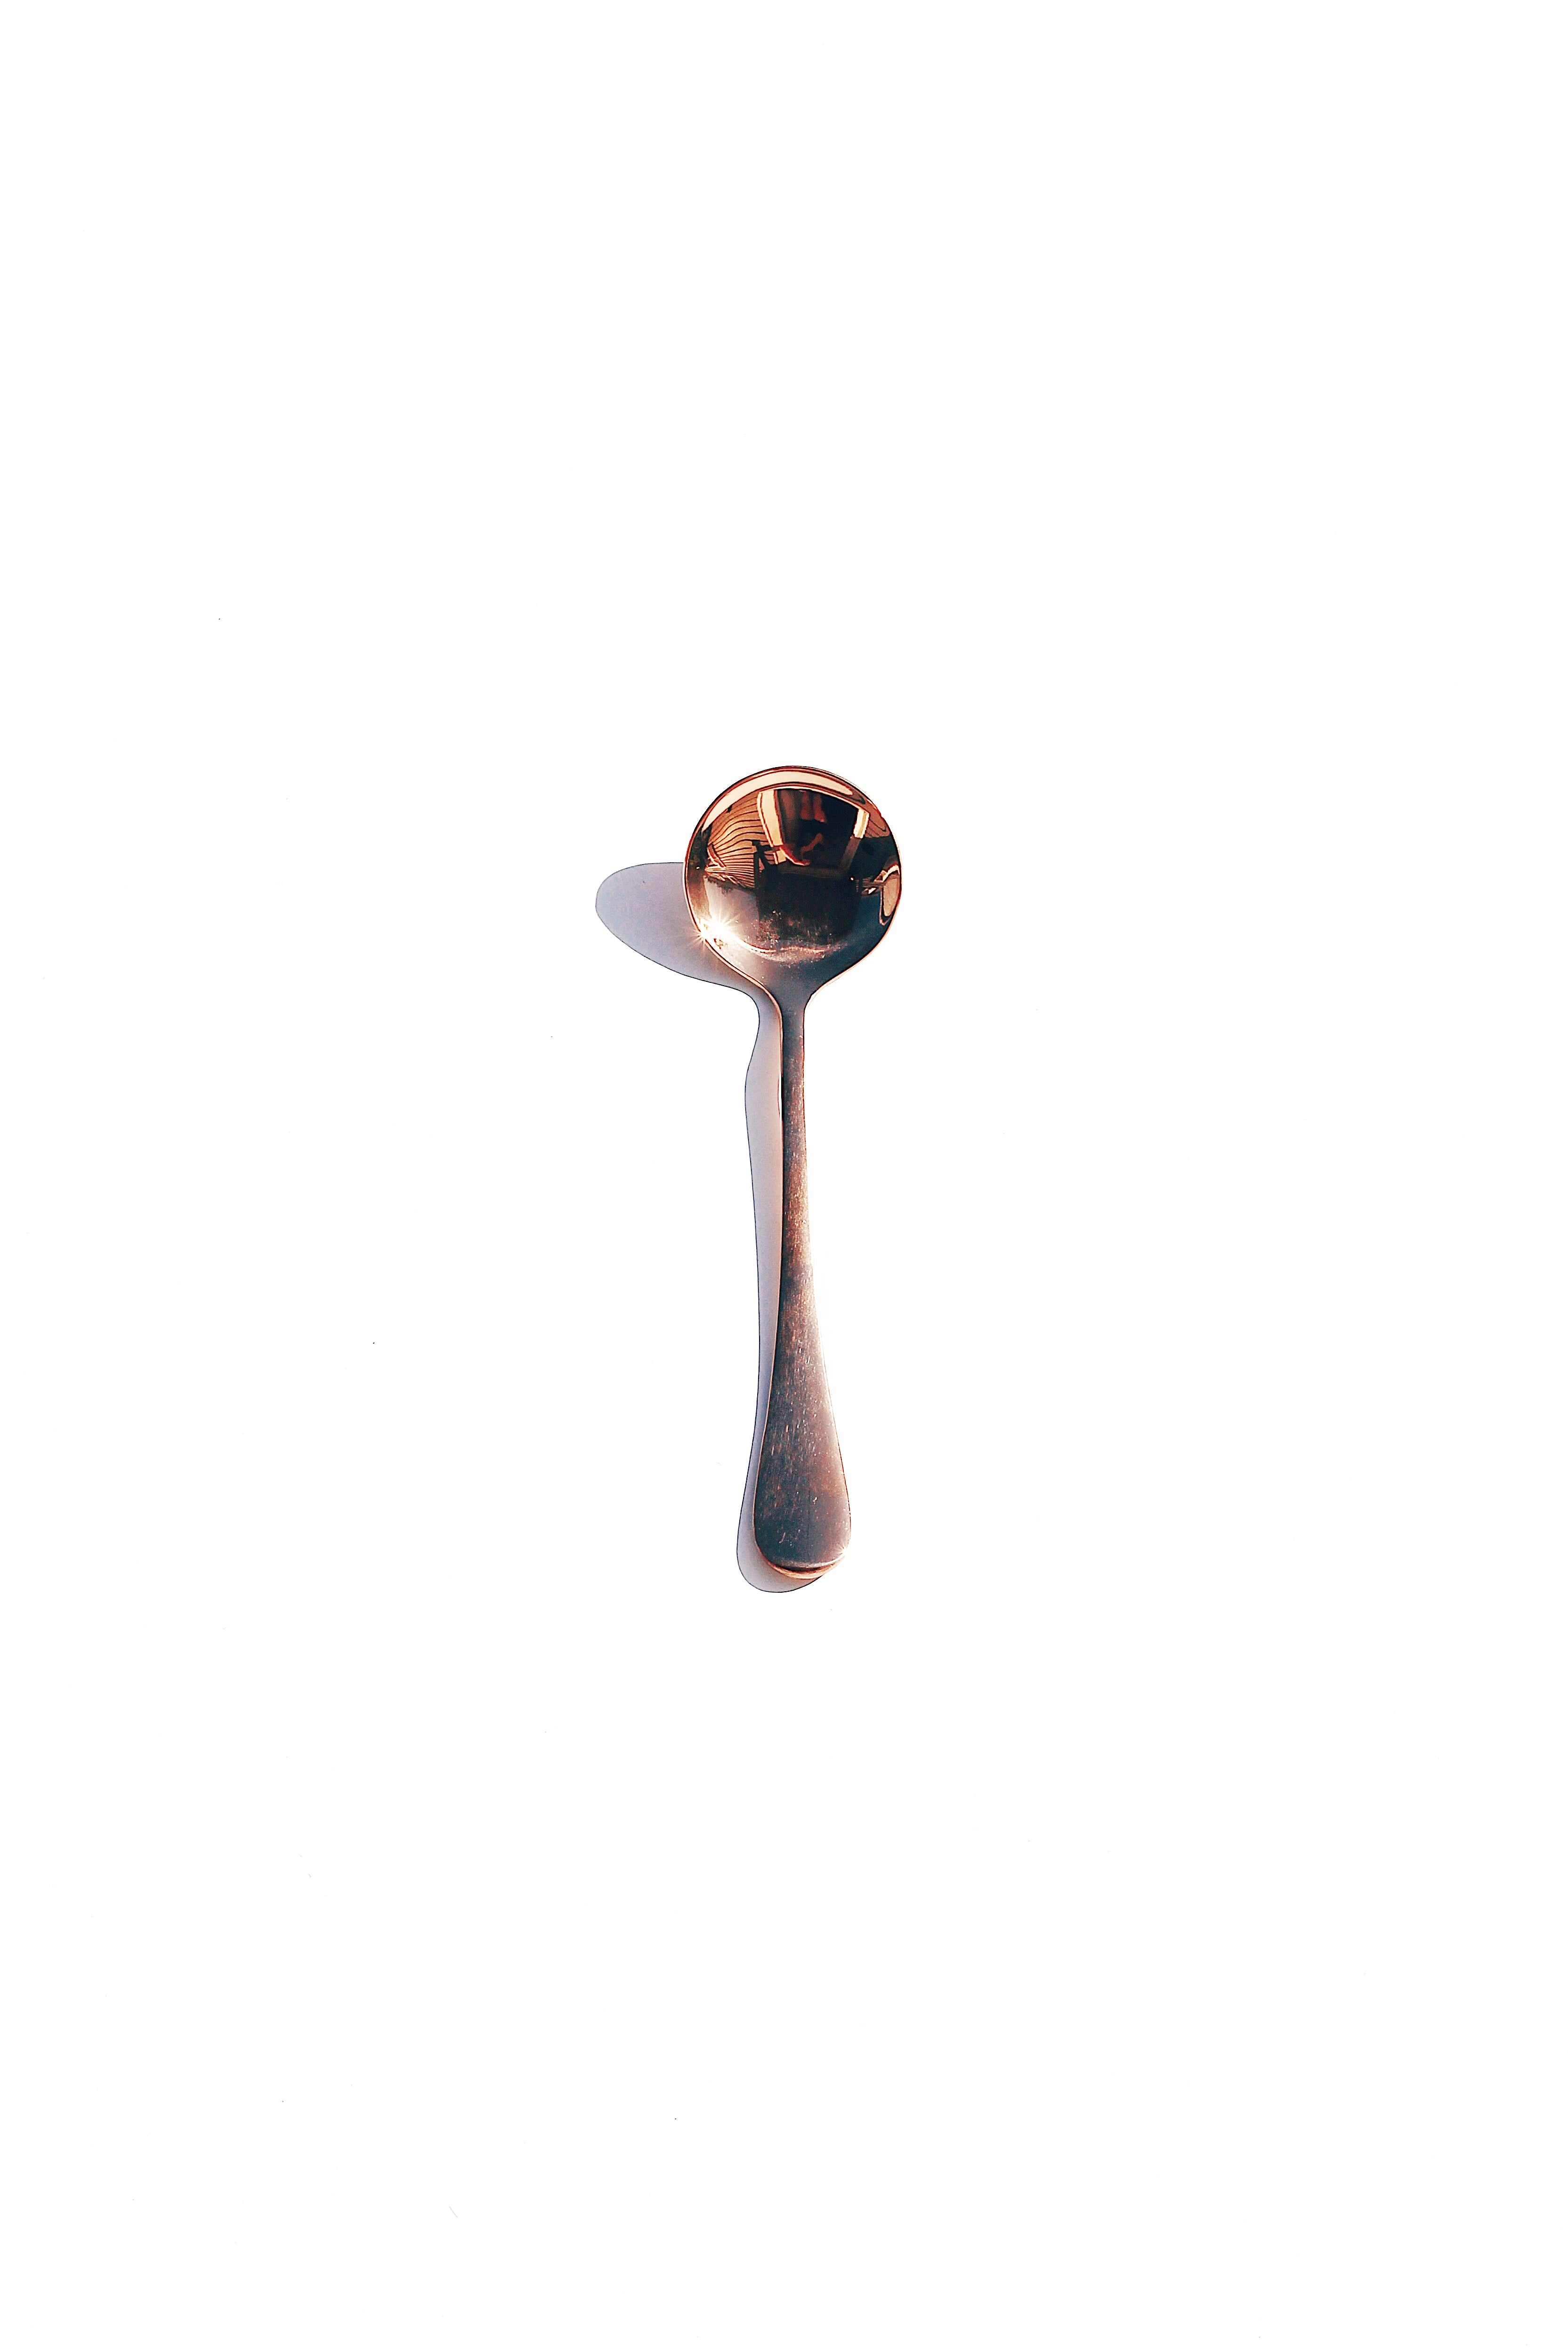 Cupping Spoon - Old Goat - Showroom Coffee